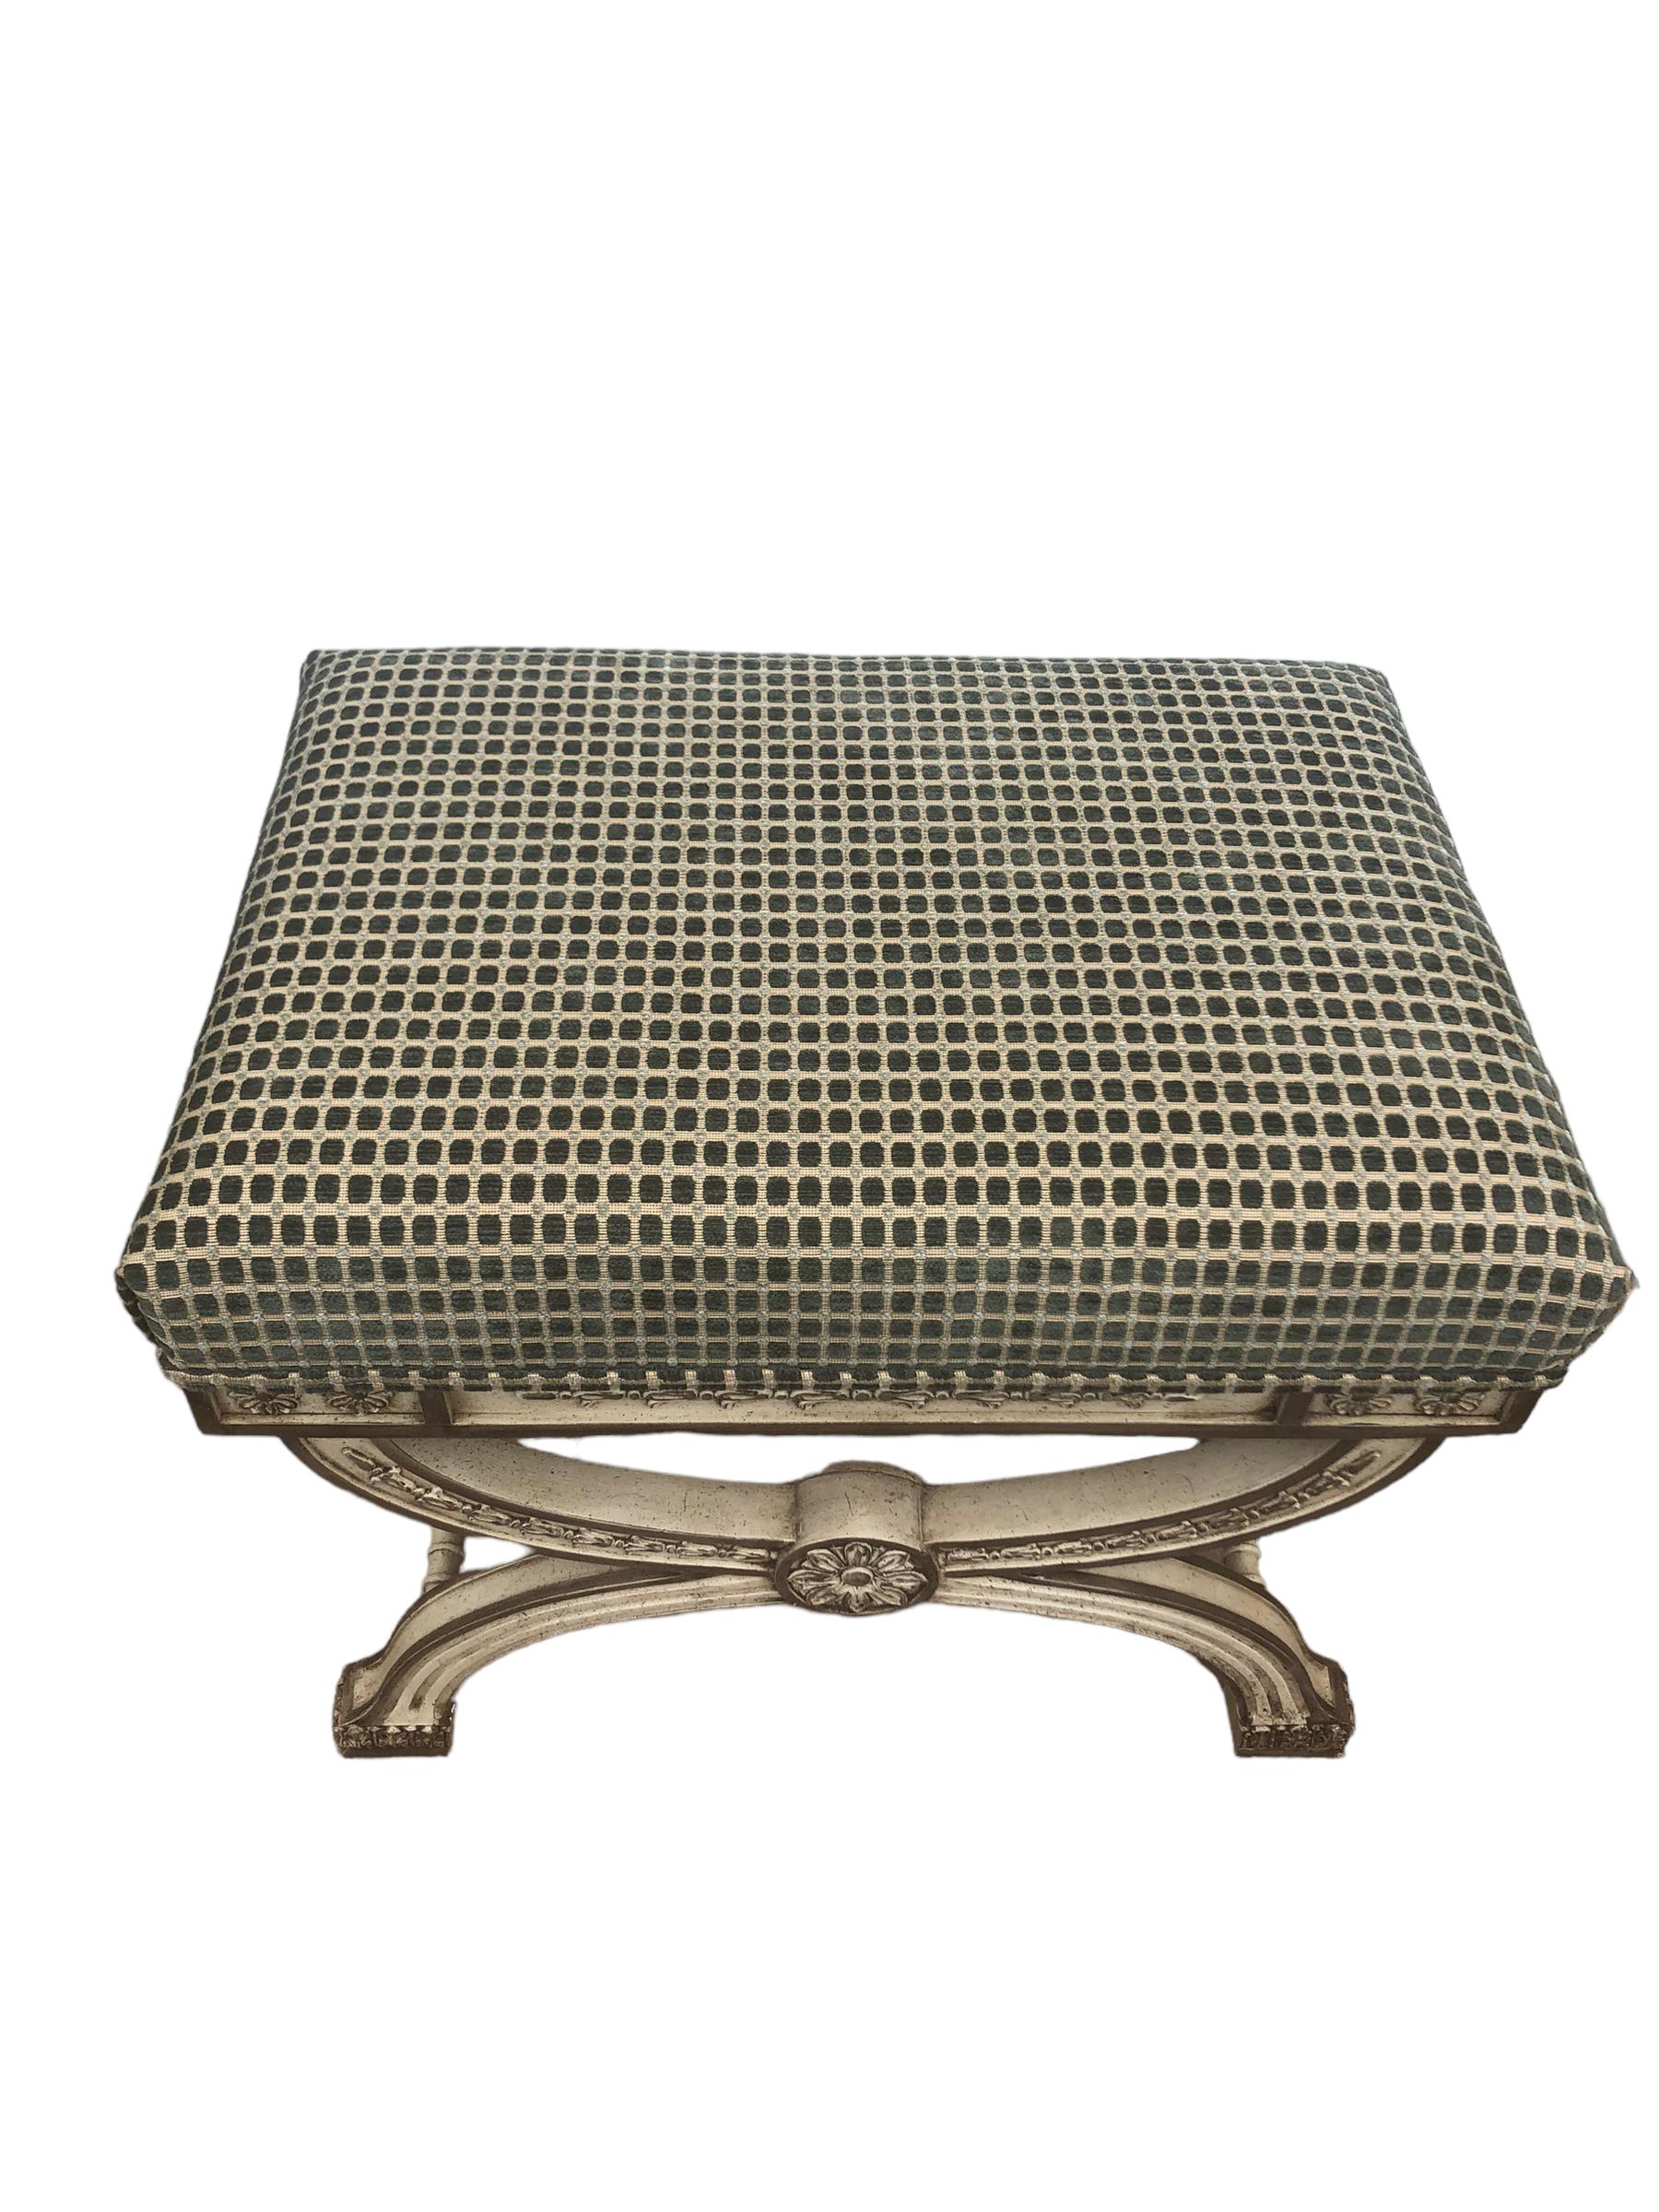 Vintage X Form Regency Style Upholstered Bench. Painted in a cream white finish with silver accents. Newly upholstered in a velvet checkered fabric. 